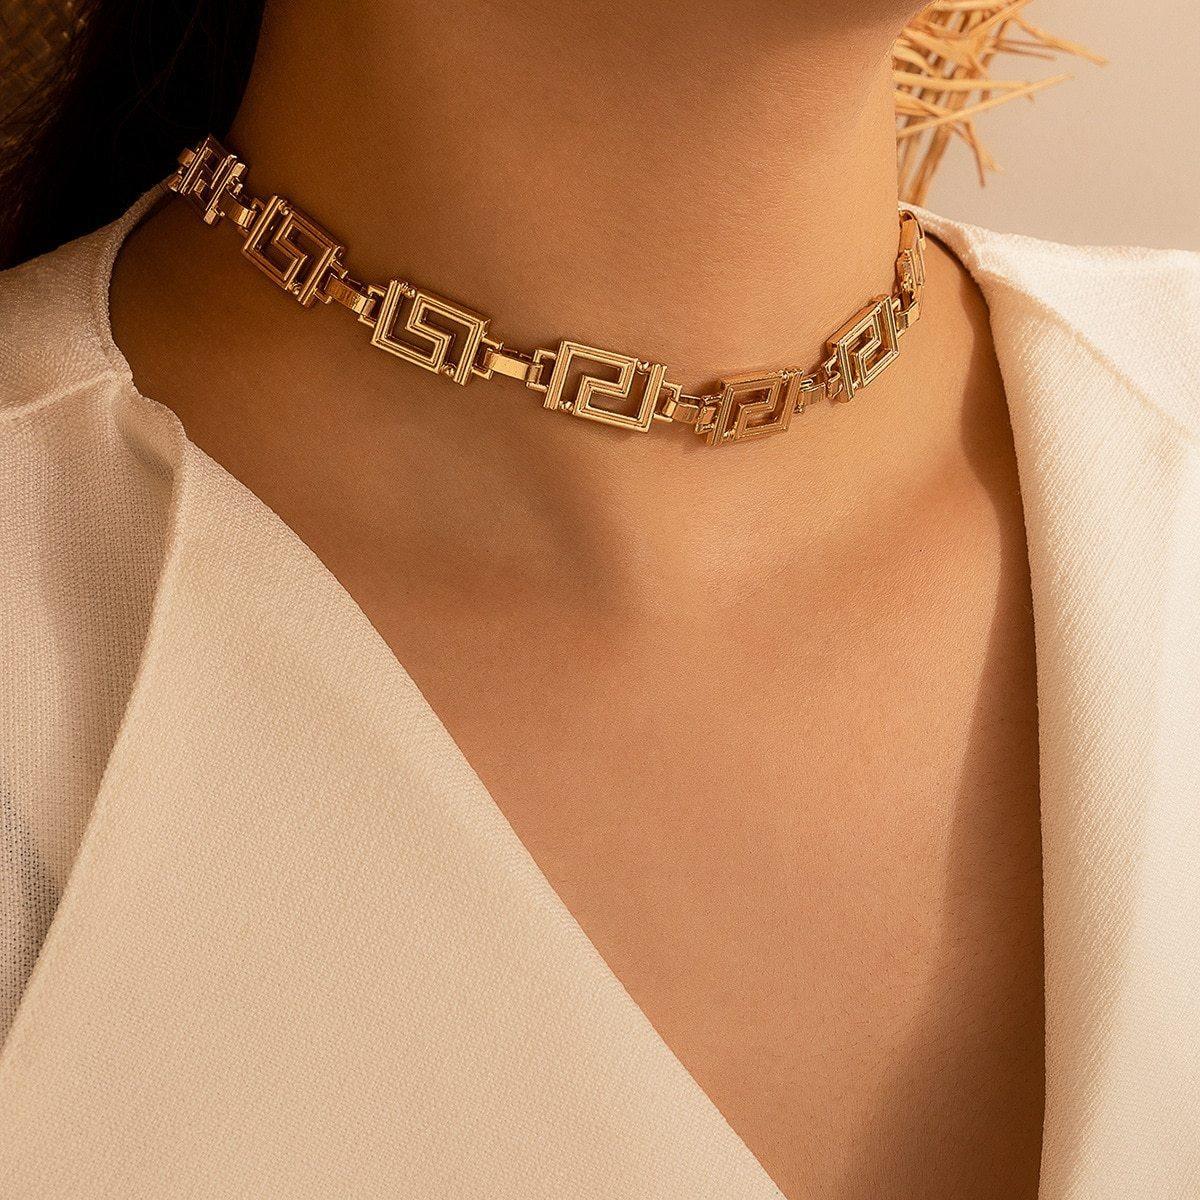 Versa Choker from The House of CO-KY - Necklaces